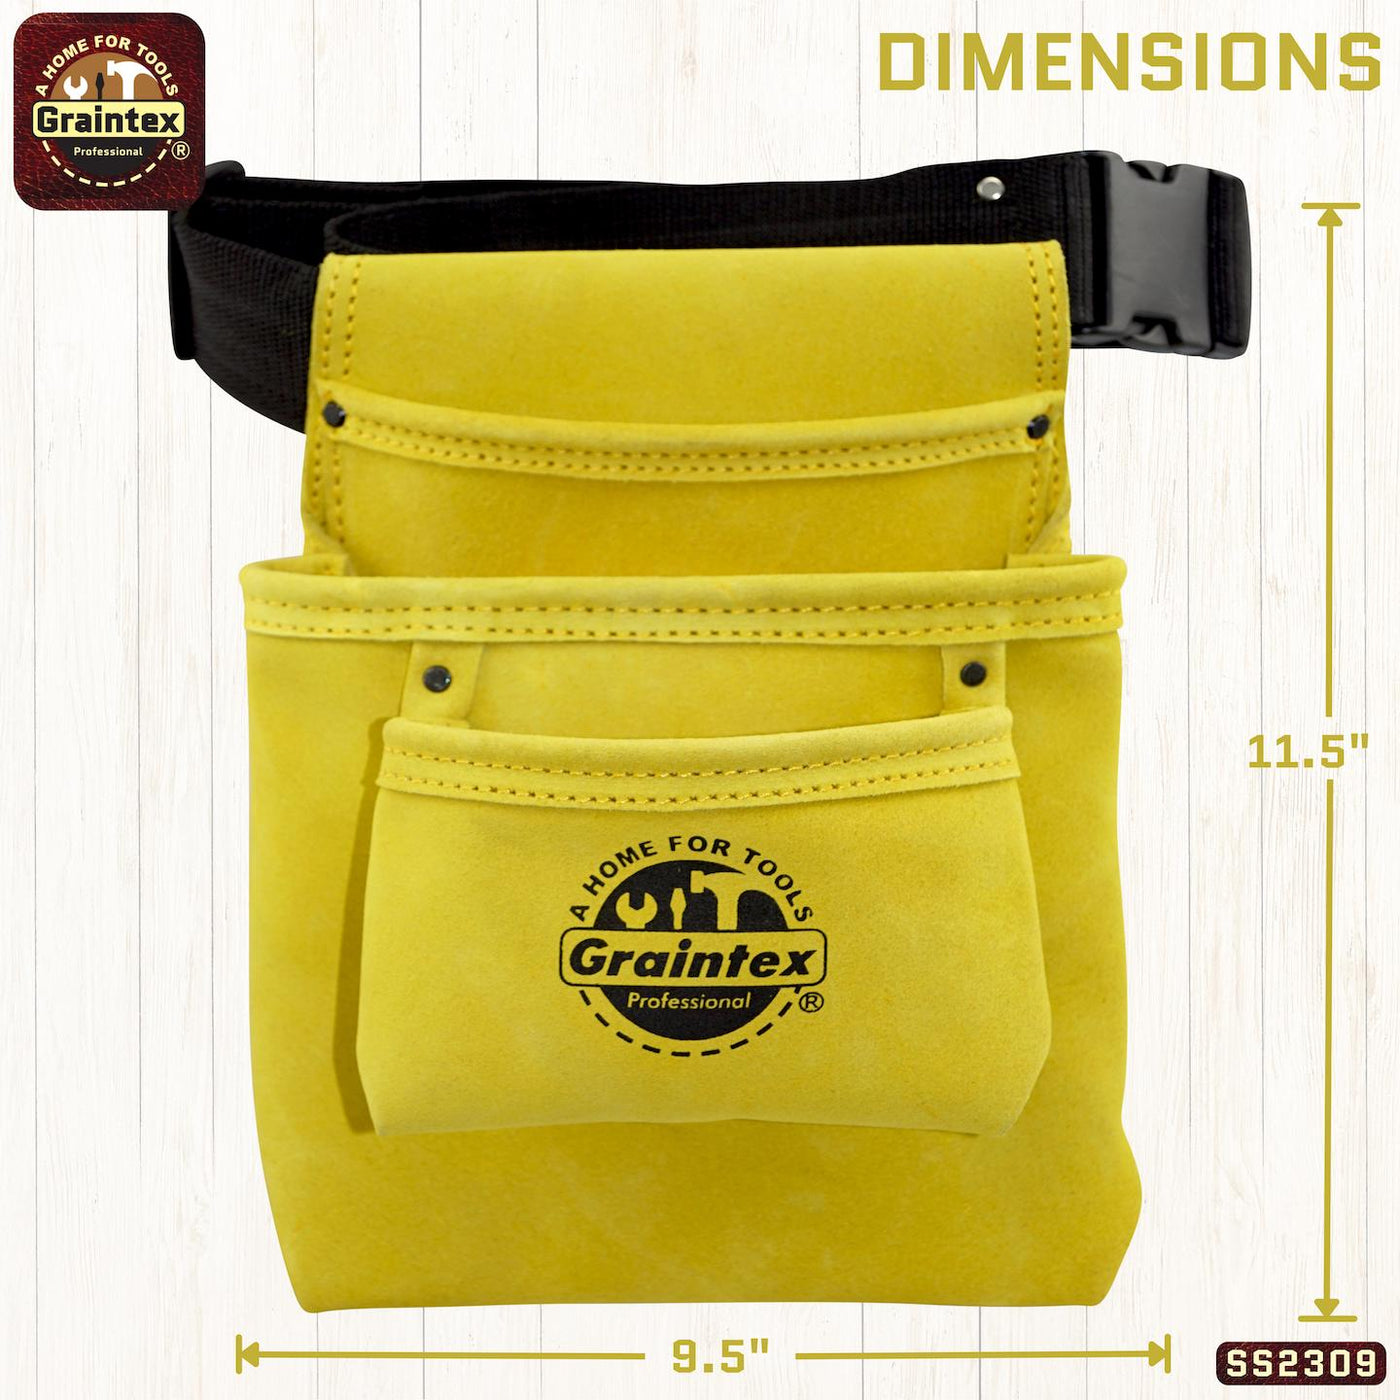 SS2309 :: 3 Pocket Nail & Tool Pouch Yellow Color Suede Leather with Belt